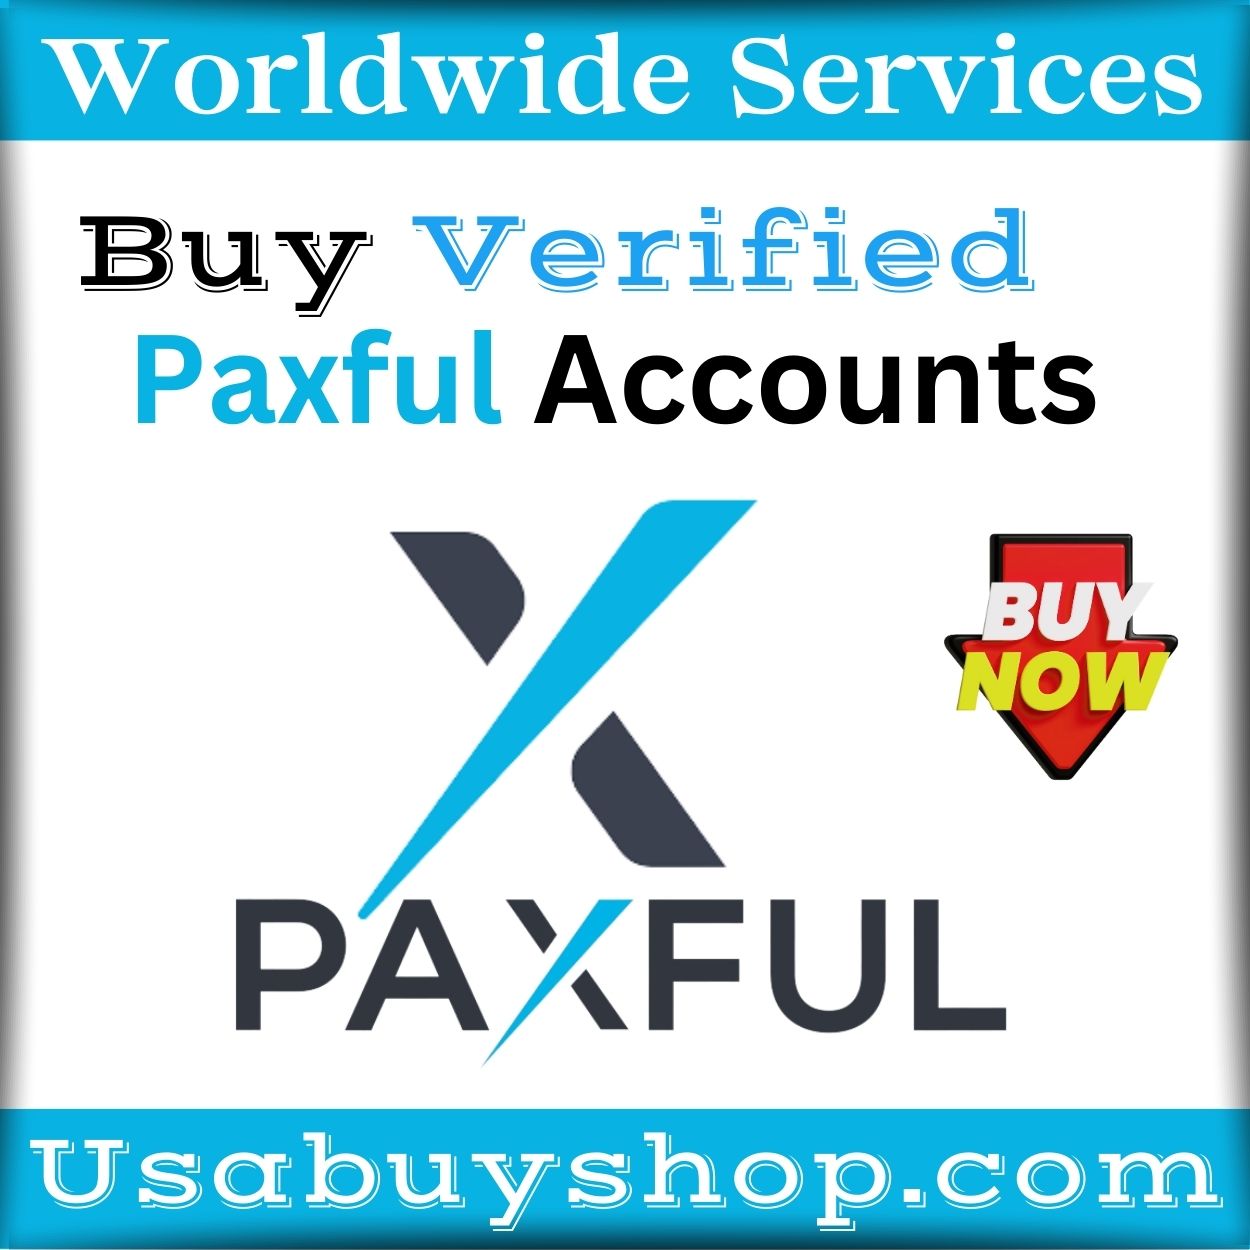 Buy Verified Paxful Accounts - 100% Verified Old Gmail Account